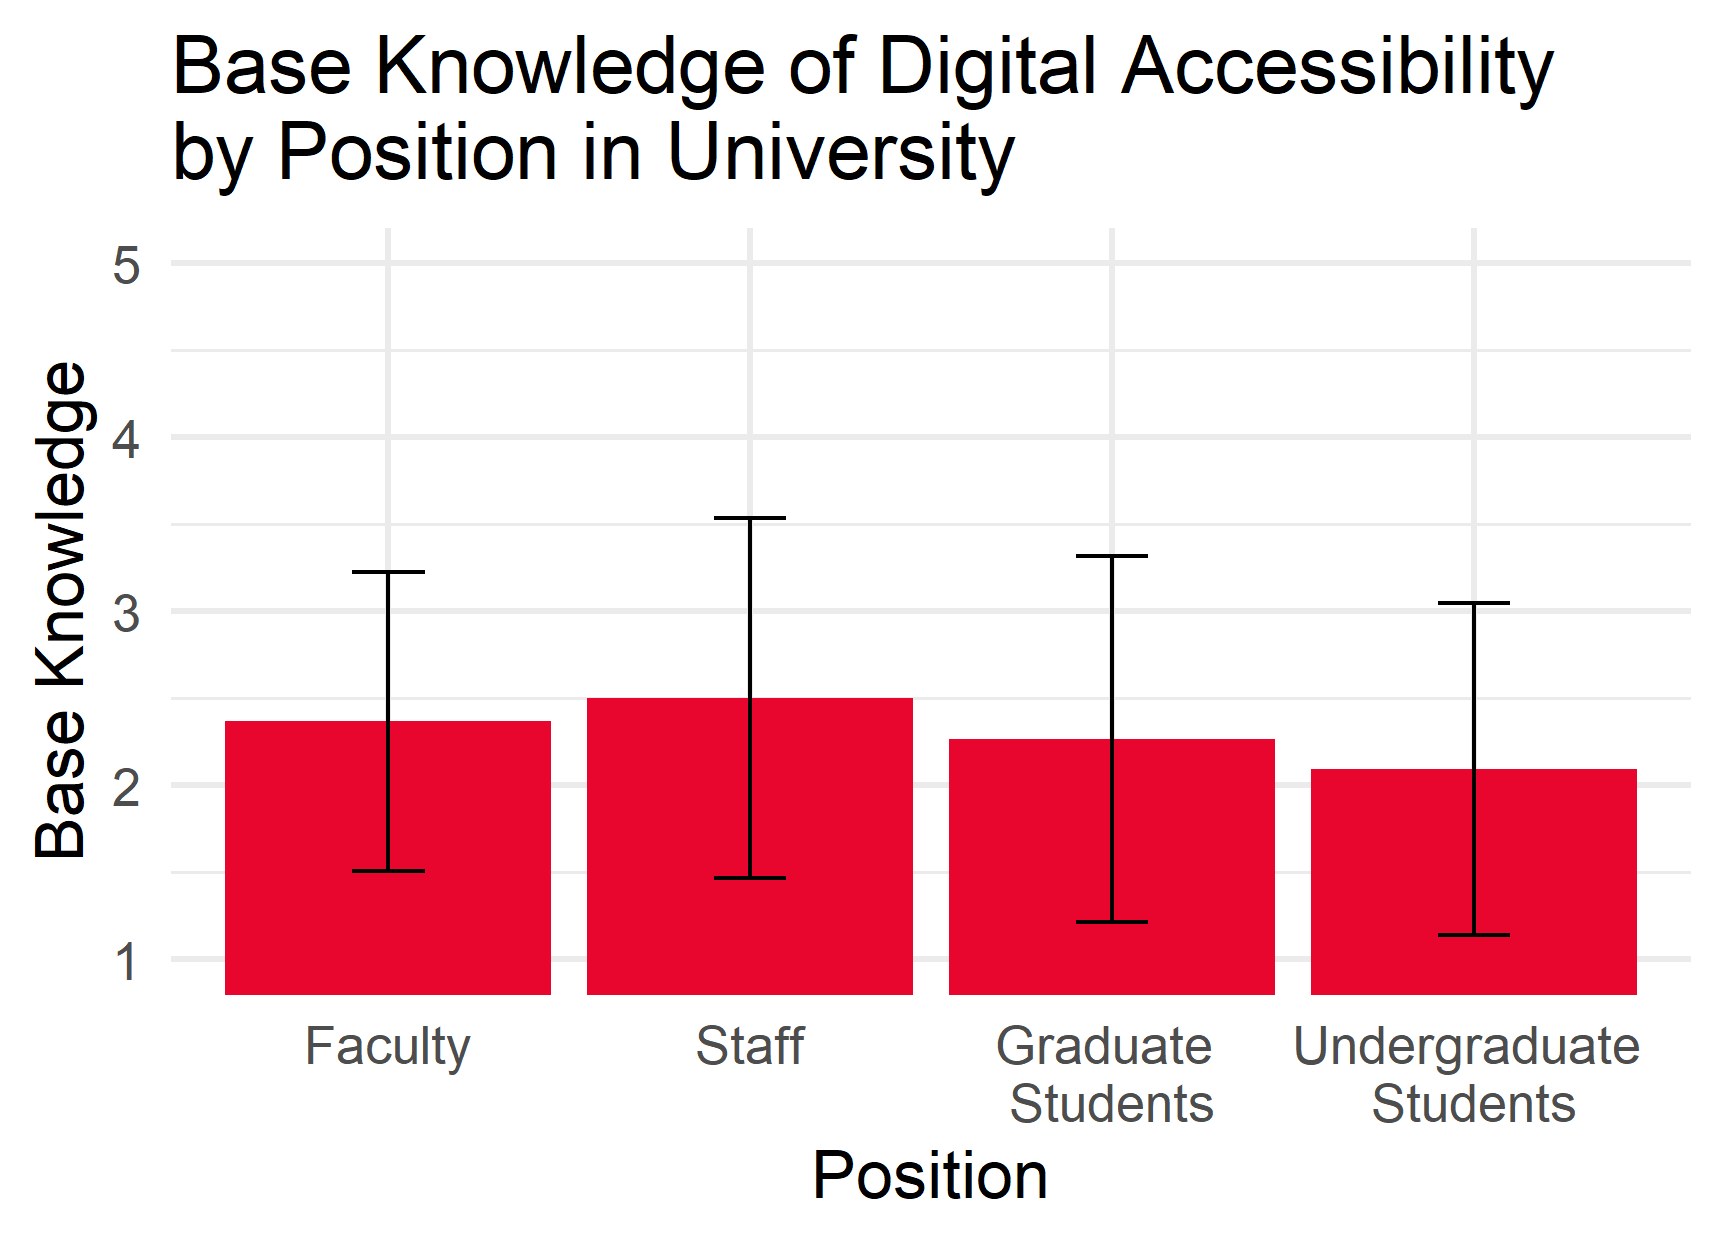 A barplot with error bars Base Knowledge of Digital Accessibility by Position in the University. No significance, but Staff tend to claim the most knowledge about digital accessibility (M = 2.5; CI = 1.5, 3.5), followed by Faculty (M = 2.4; CI = 1.5, 3.2), Graduate Students (M = 2.3; CI = 1.2, 3.4), and Undergraduate Students (M = 2.1; CI = 1.2, 3.0).